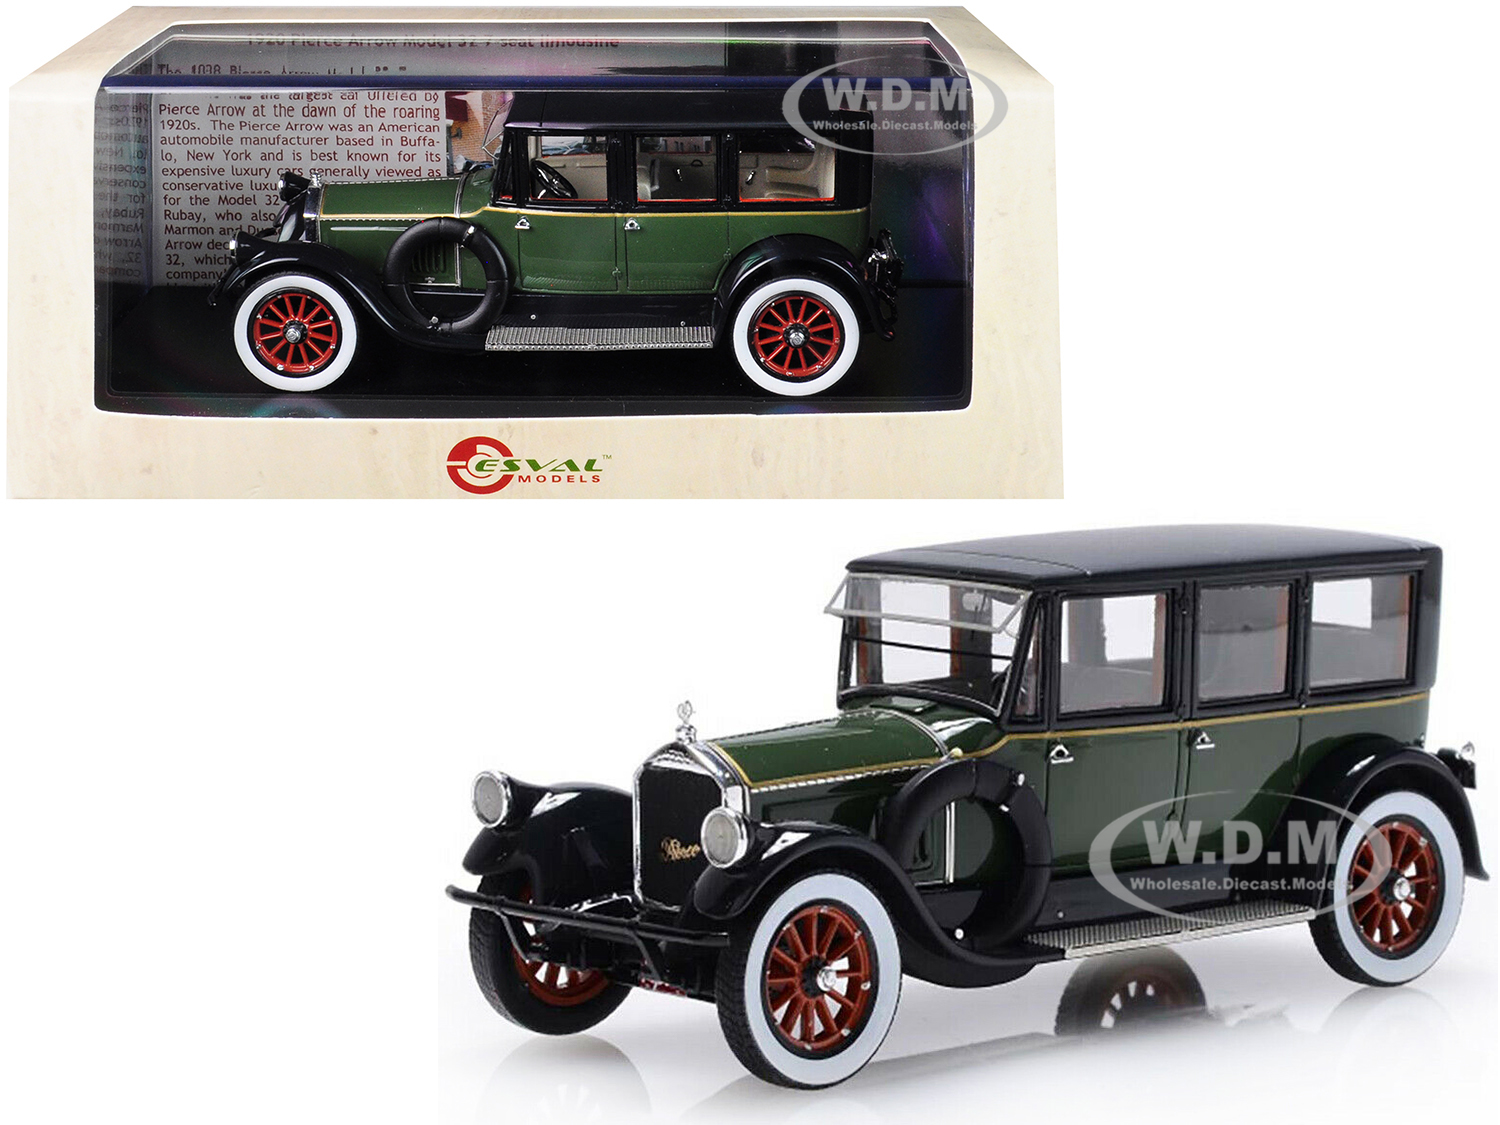 1920 Pierce Arrow Model 32 7-seat Limousine Green And Black Limited Edition To 250 Pieces Worldwide 1/43 Model Car By Esval Models